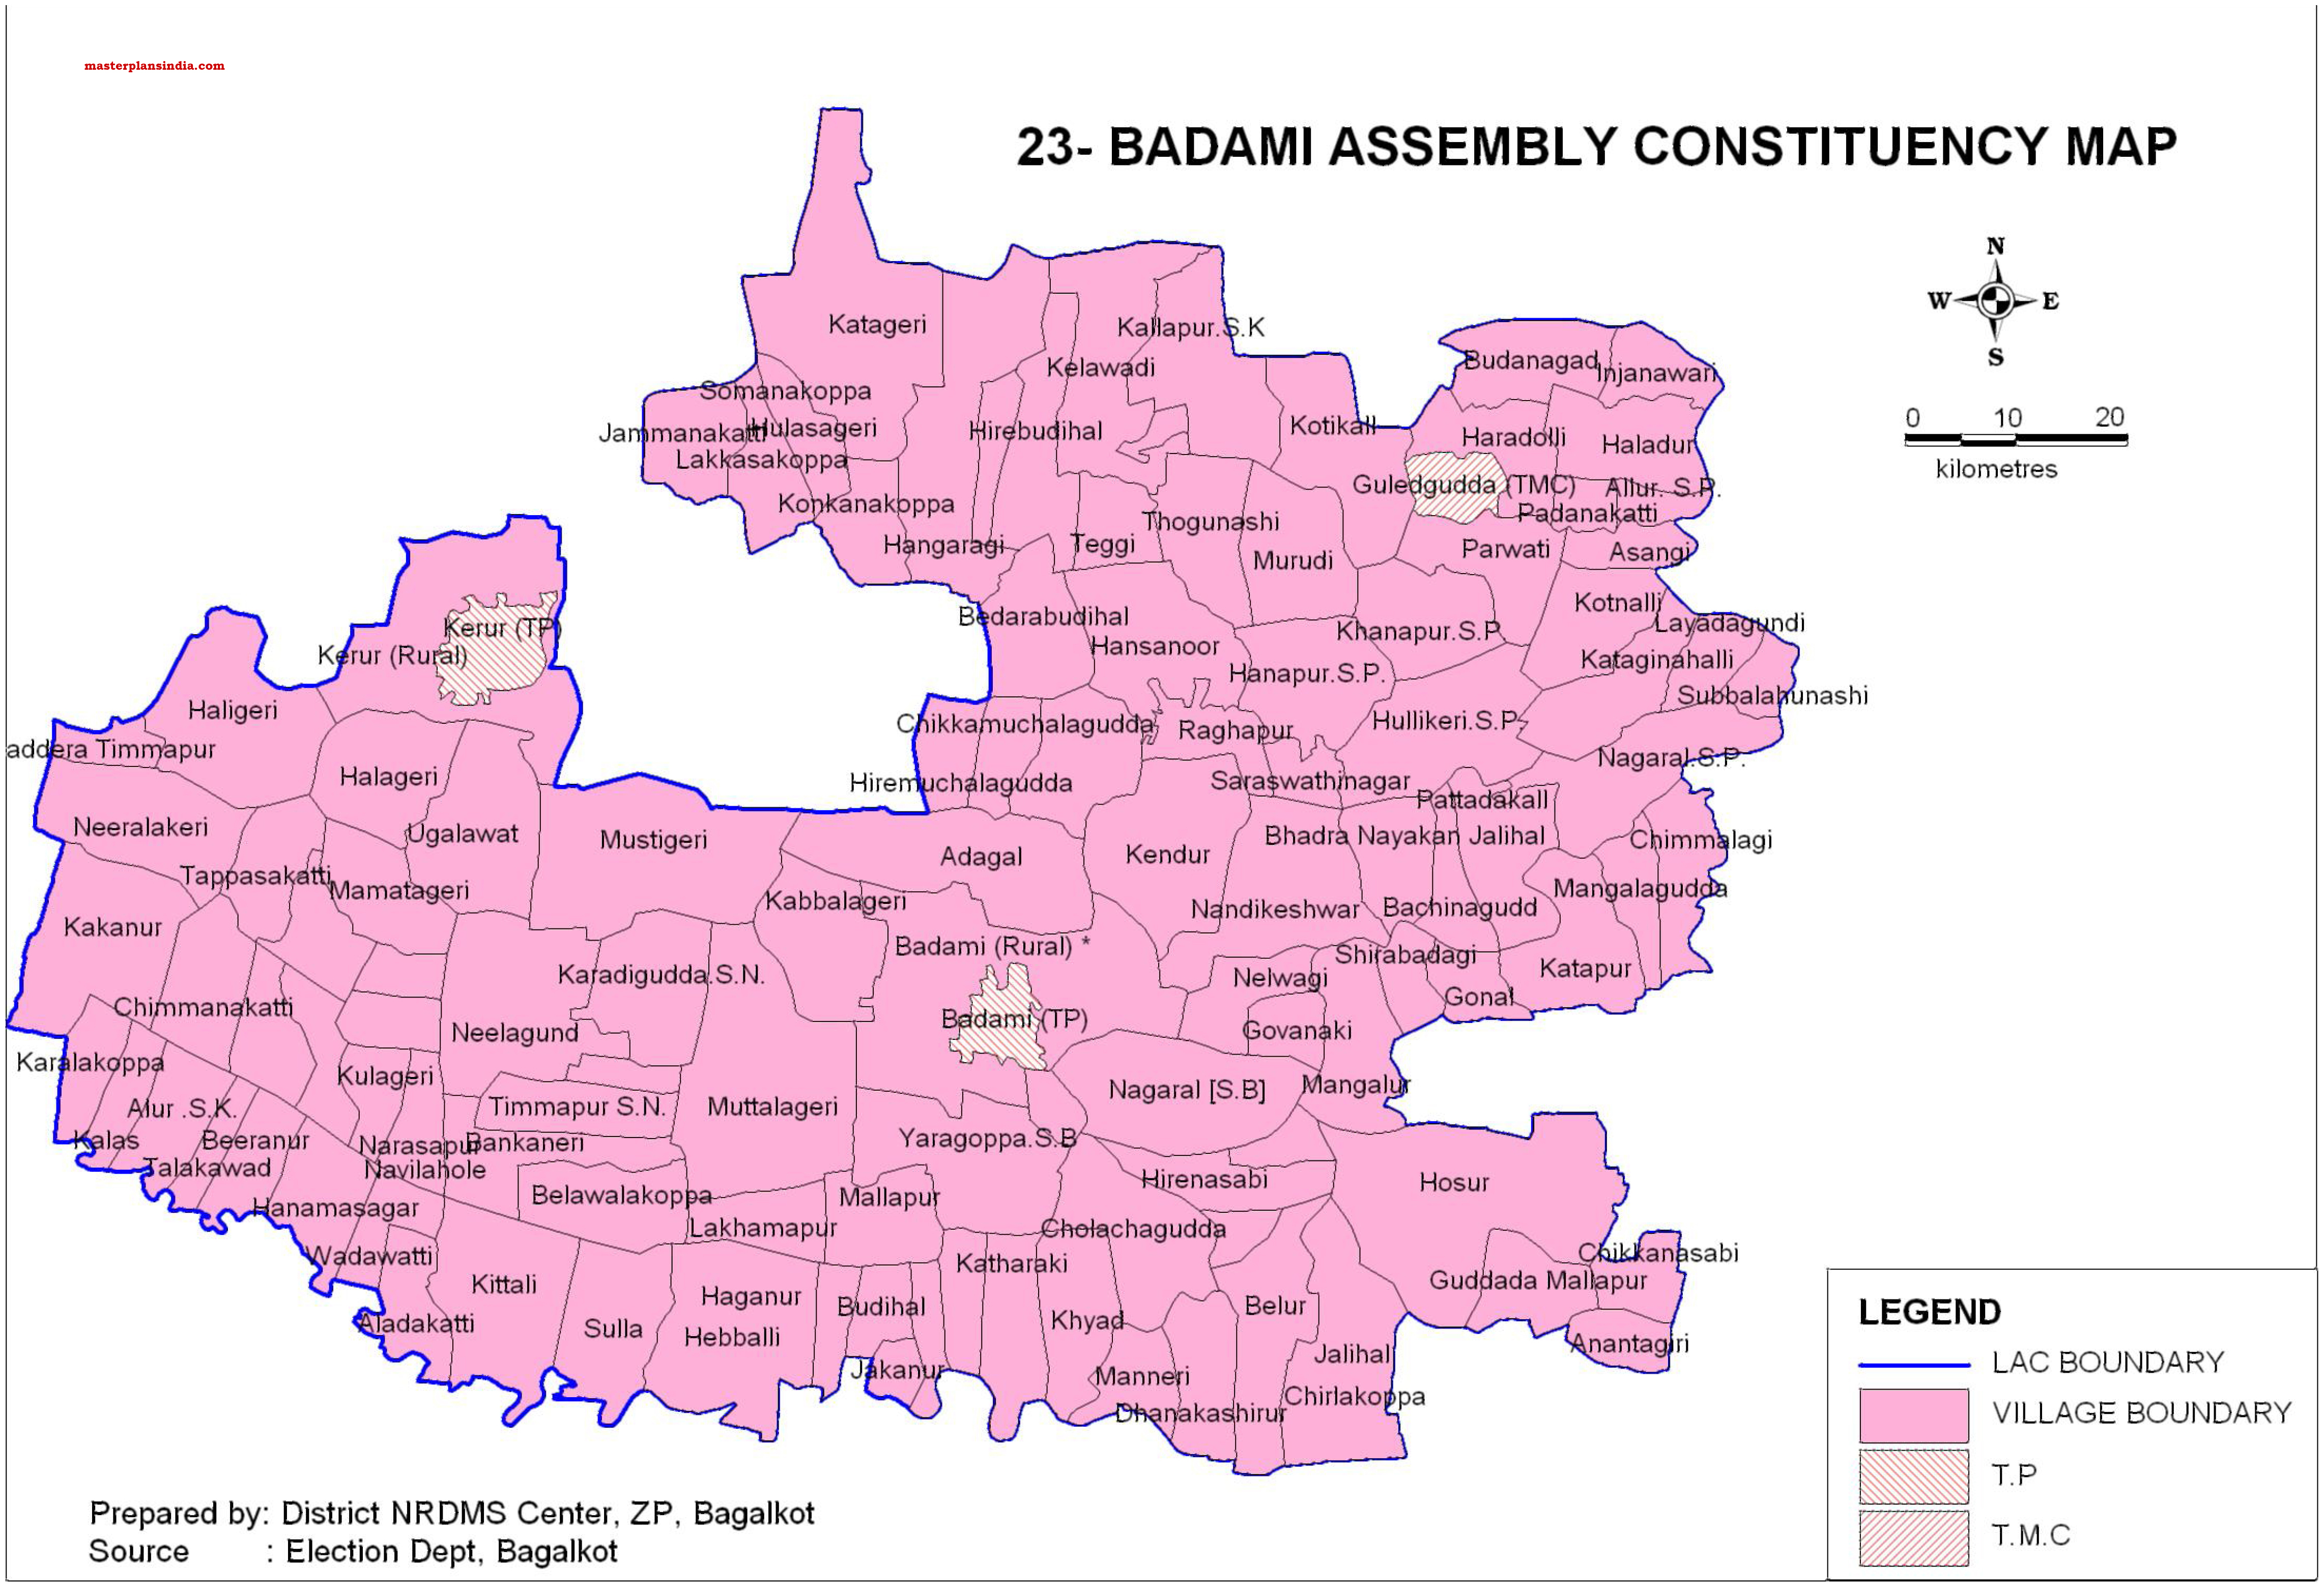 Badami Assembly Constituency Map PDF Download - Master Plans India